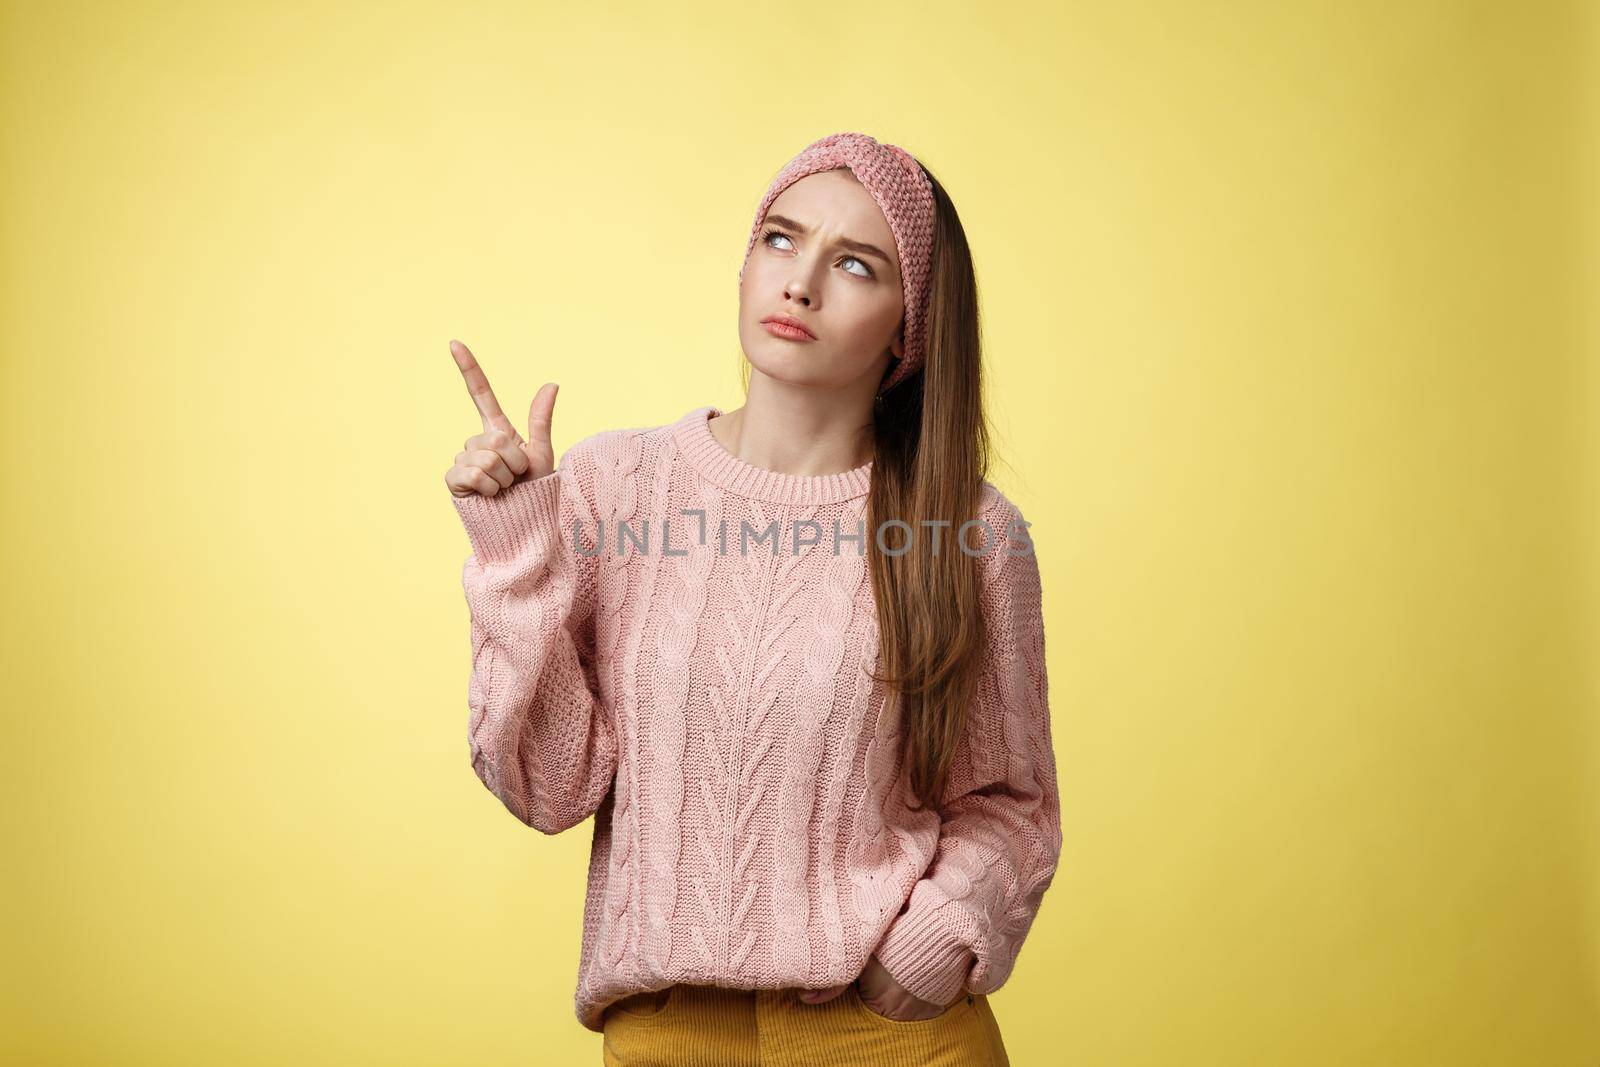 Frustrated upset, gloomy cute young woman frowning making disappointed grimace pointing, looking upper left corner displeased unsatisfied and unhappy posing confused against yellow background.